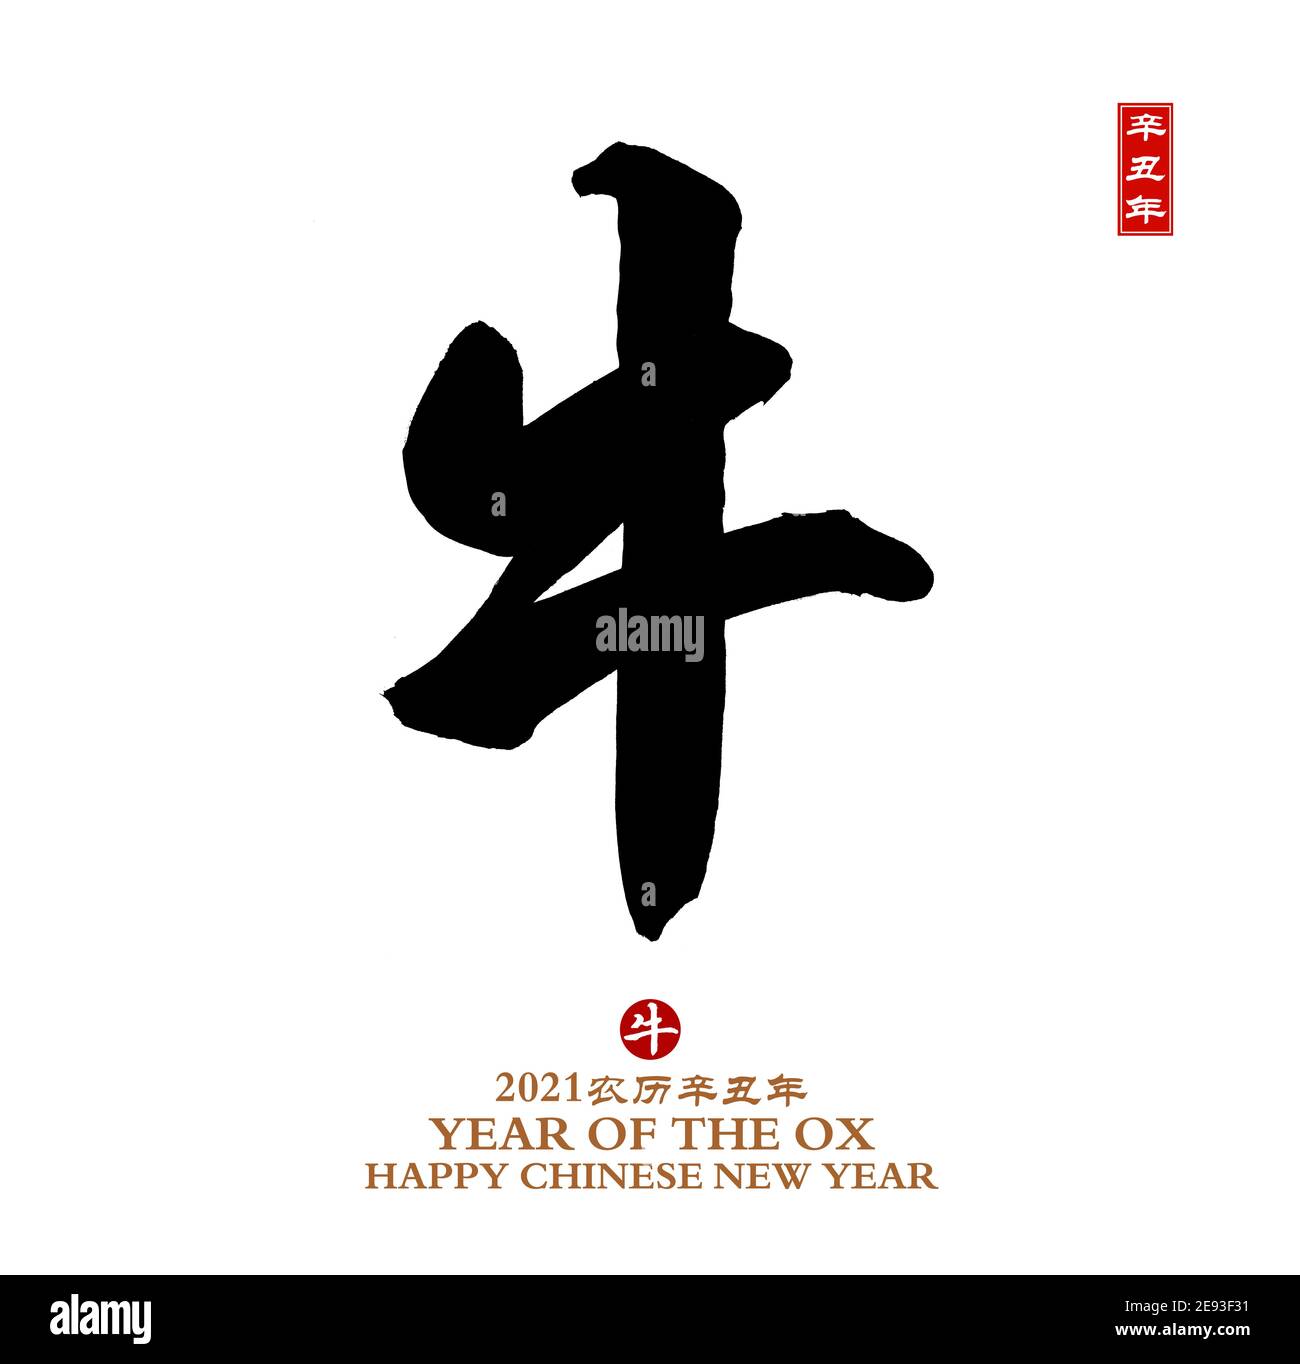 Chinese calligraphy translation: year of the ox,seal translation: Chinese calendar for the year of rat 2021. Stock Photo